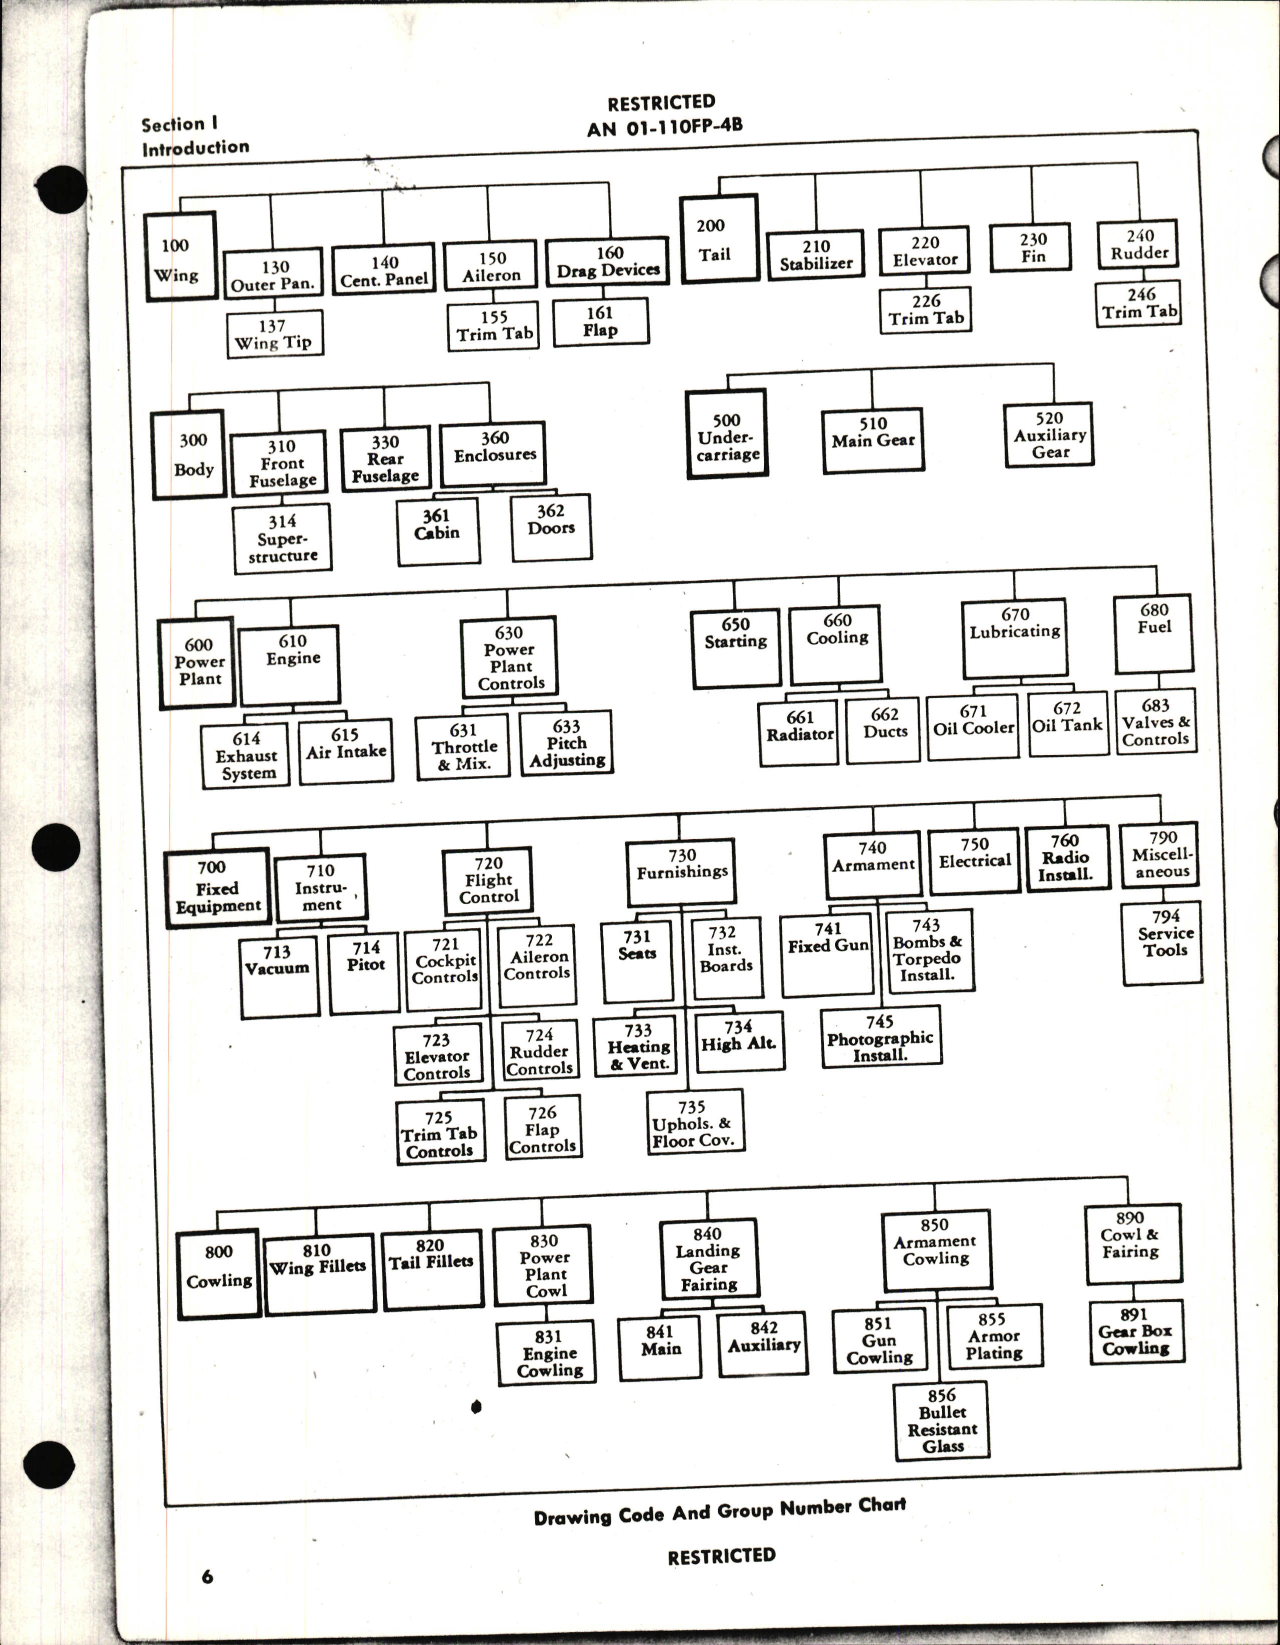 Sample page 8 from AirCorps Library document: Illustrated Parts Catalog for P-63E, WOTN